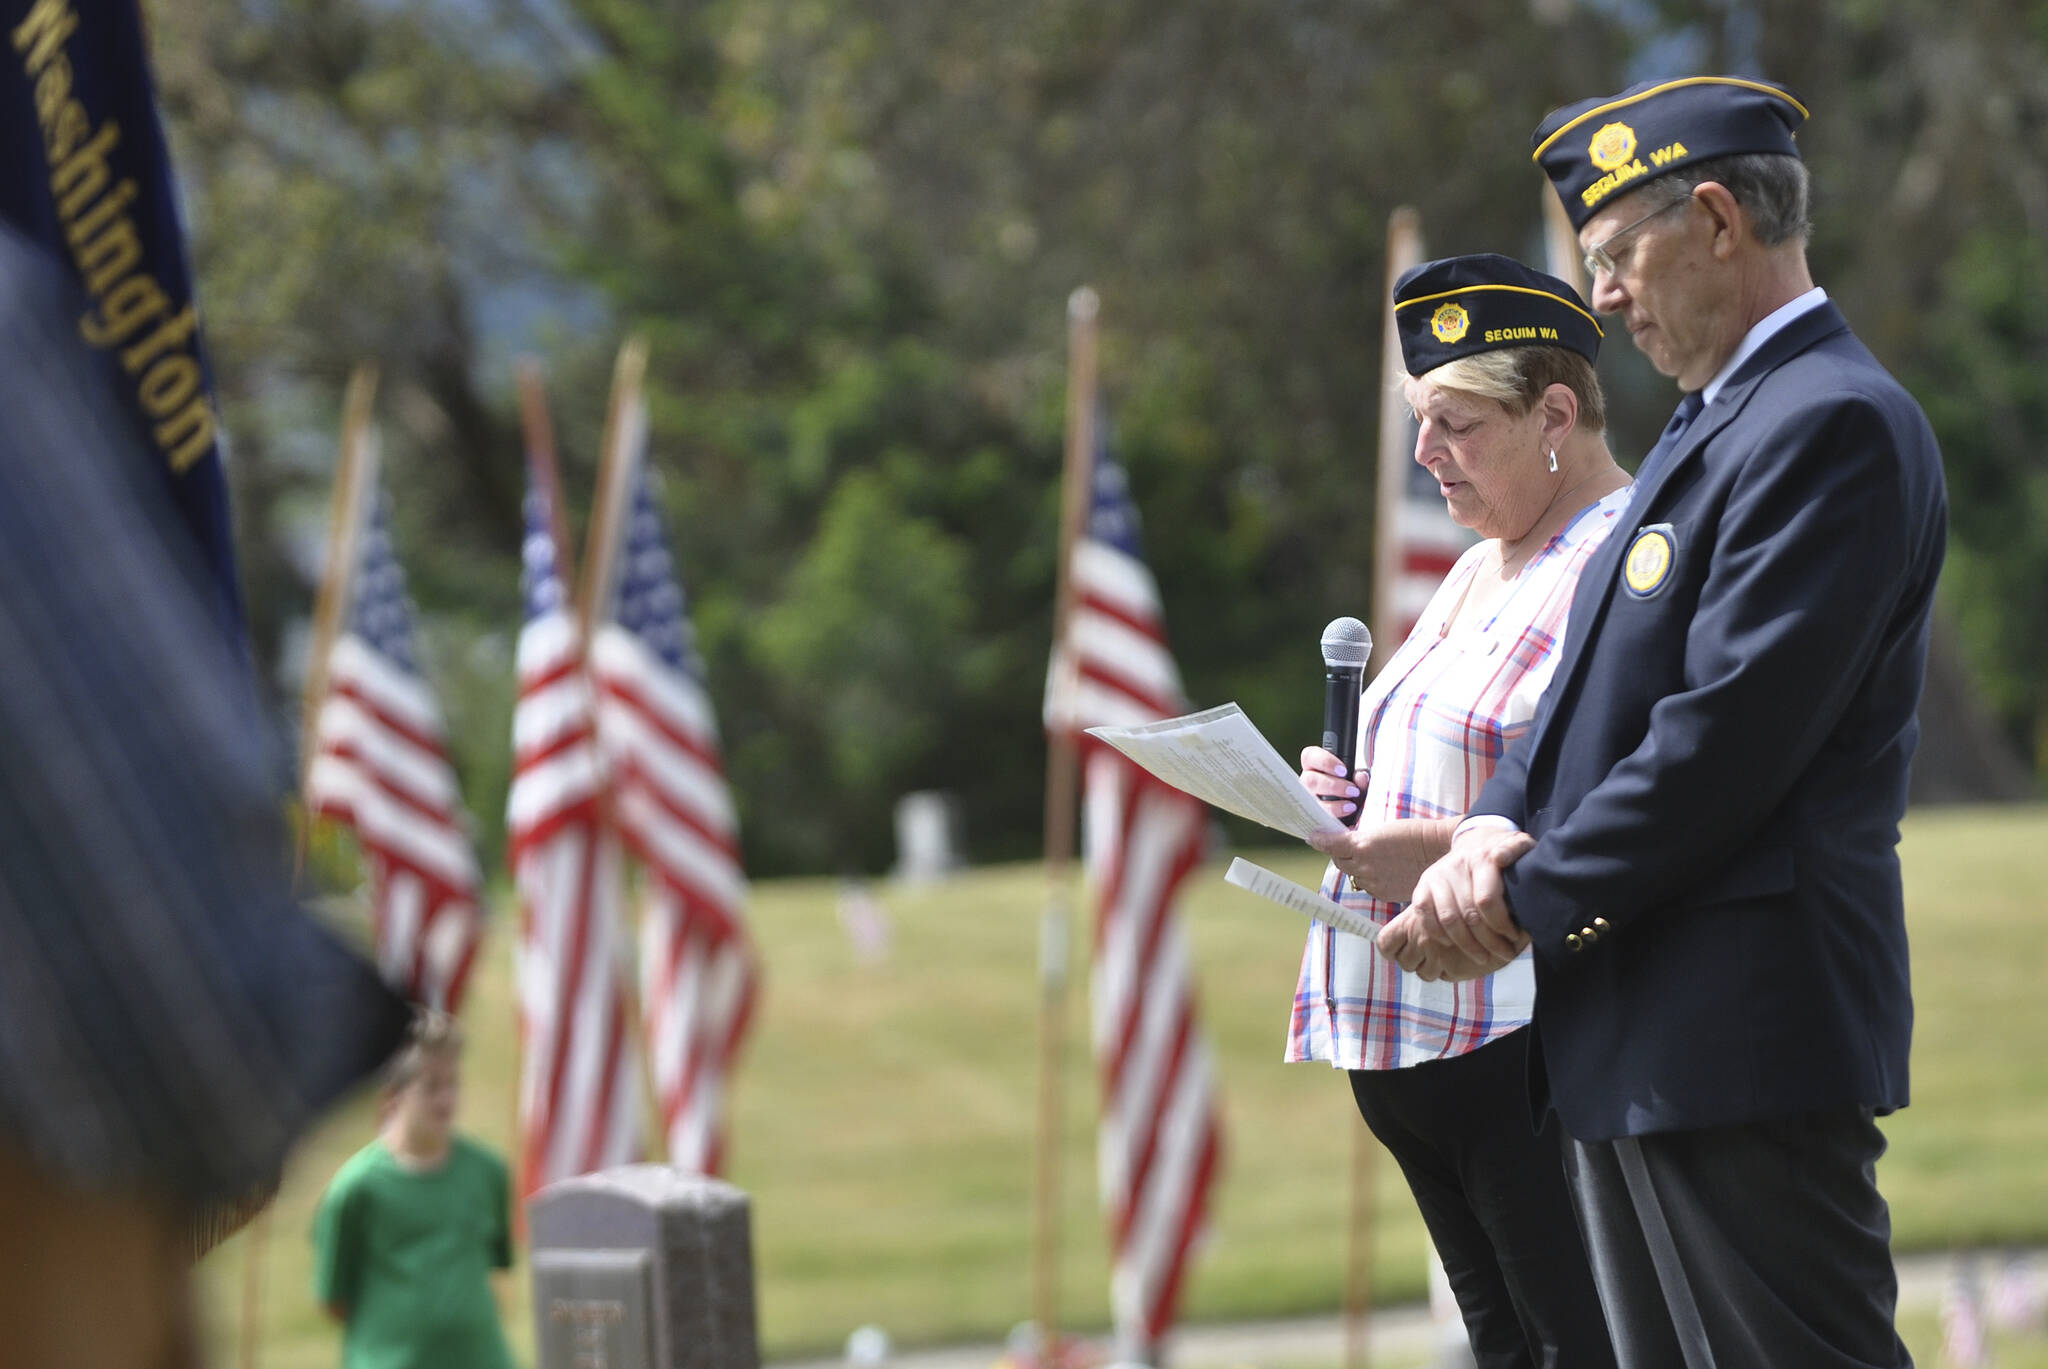 Nancy Zimmermann, chaplain for American Legion Post 62, offers a prayer at the Memorial Day ceremony at Sequim View Cemetery in 2021. At right is Post commander Paul Renick. Sequim Gazette file photo by Michael Dashiell